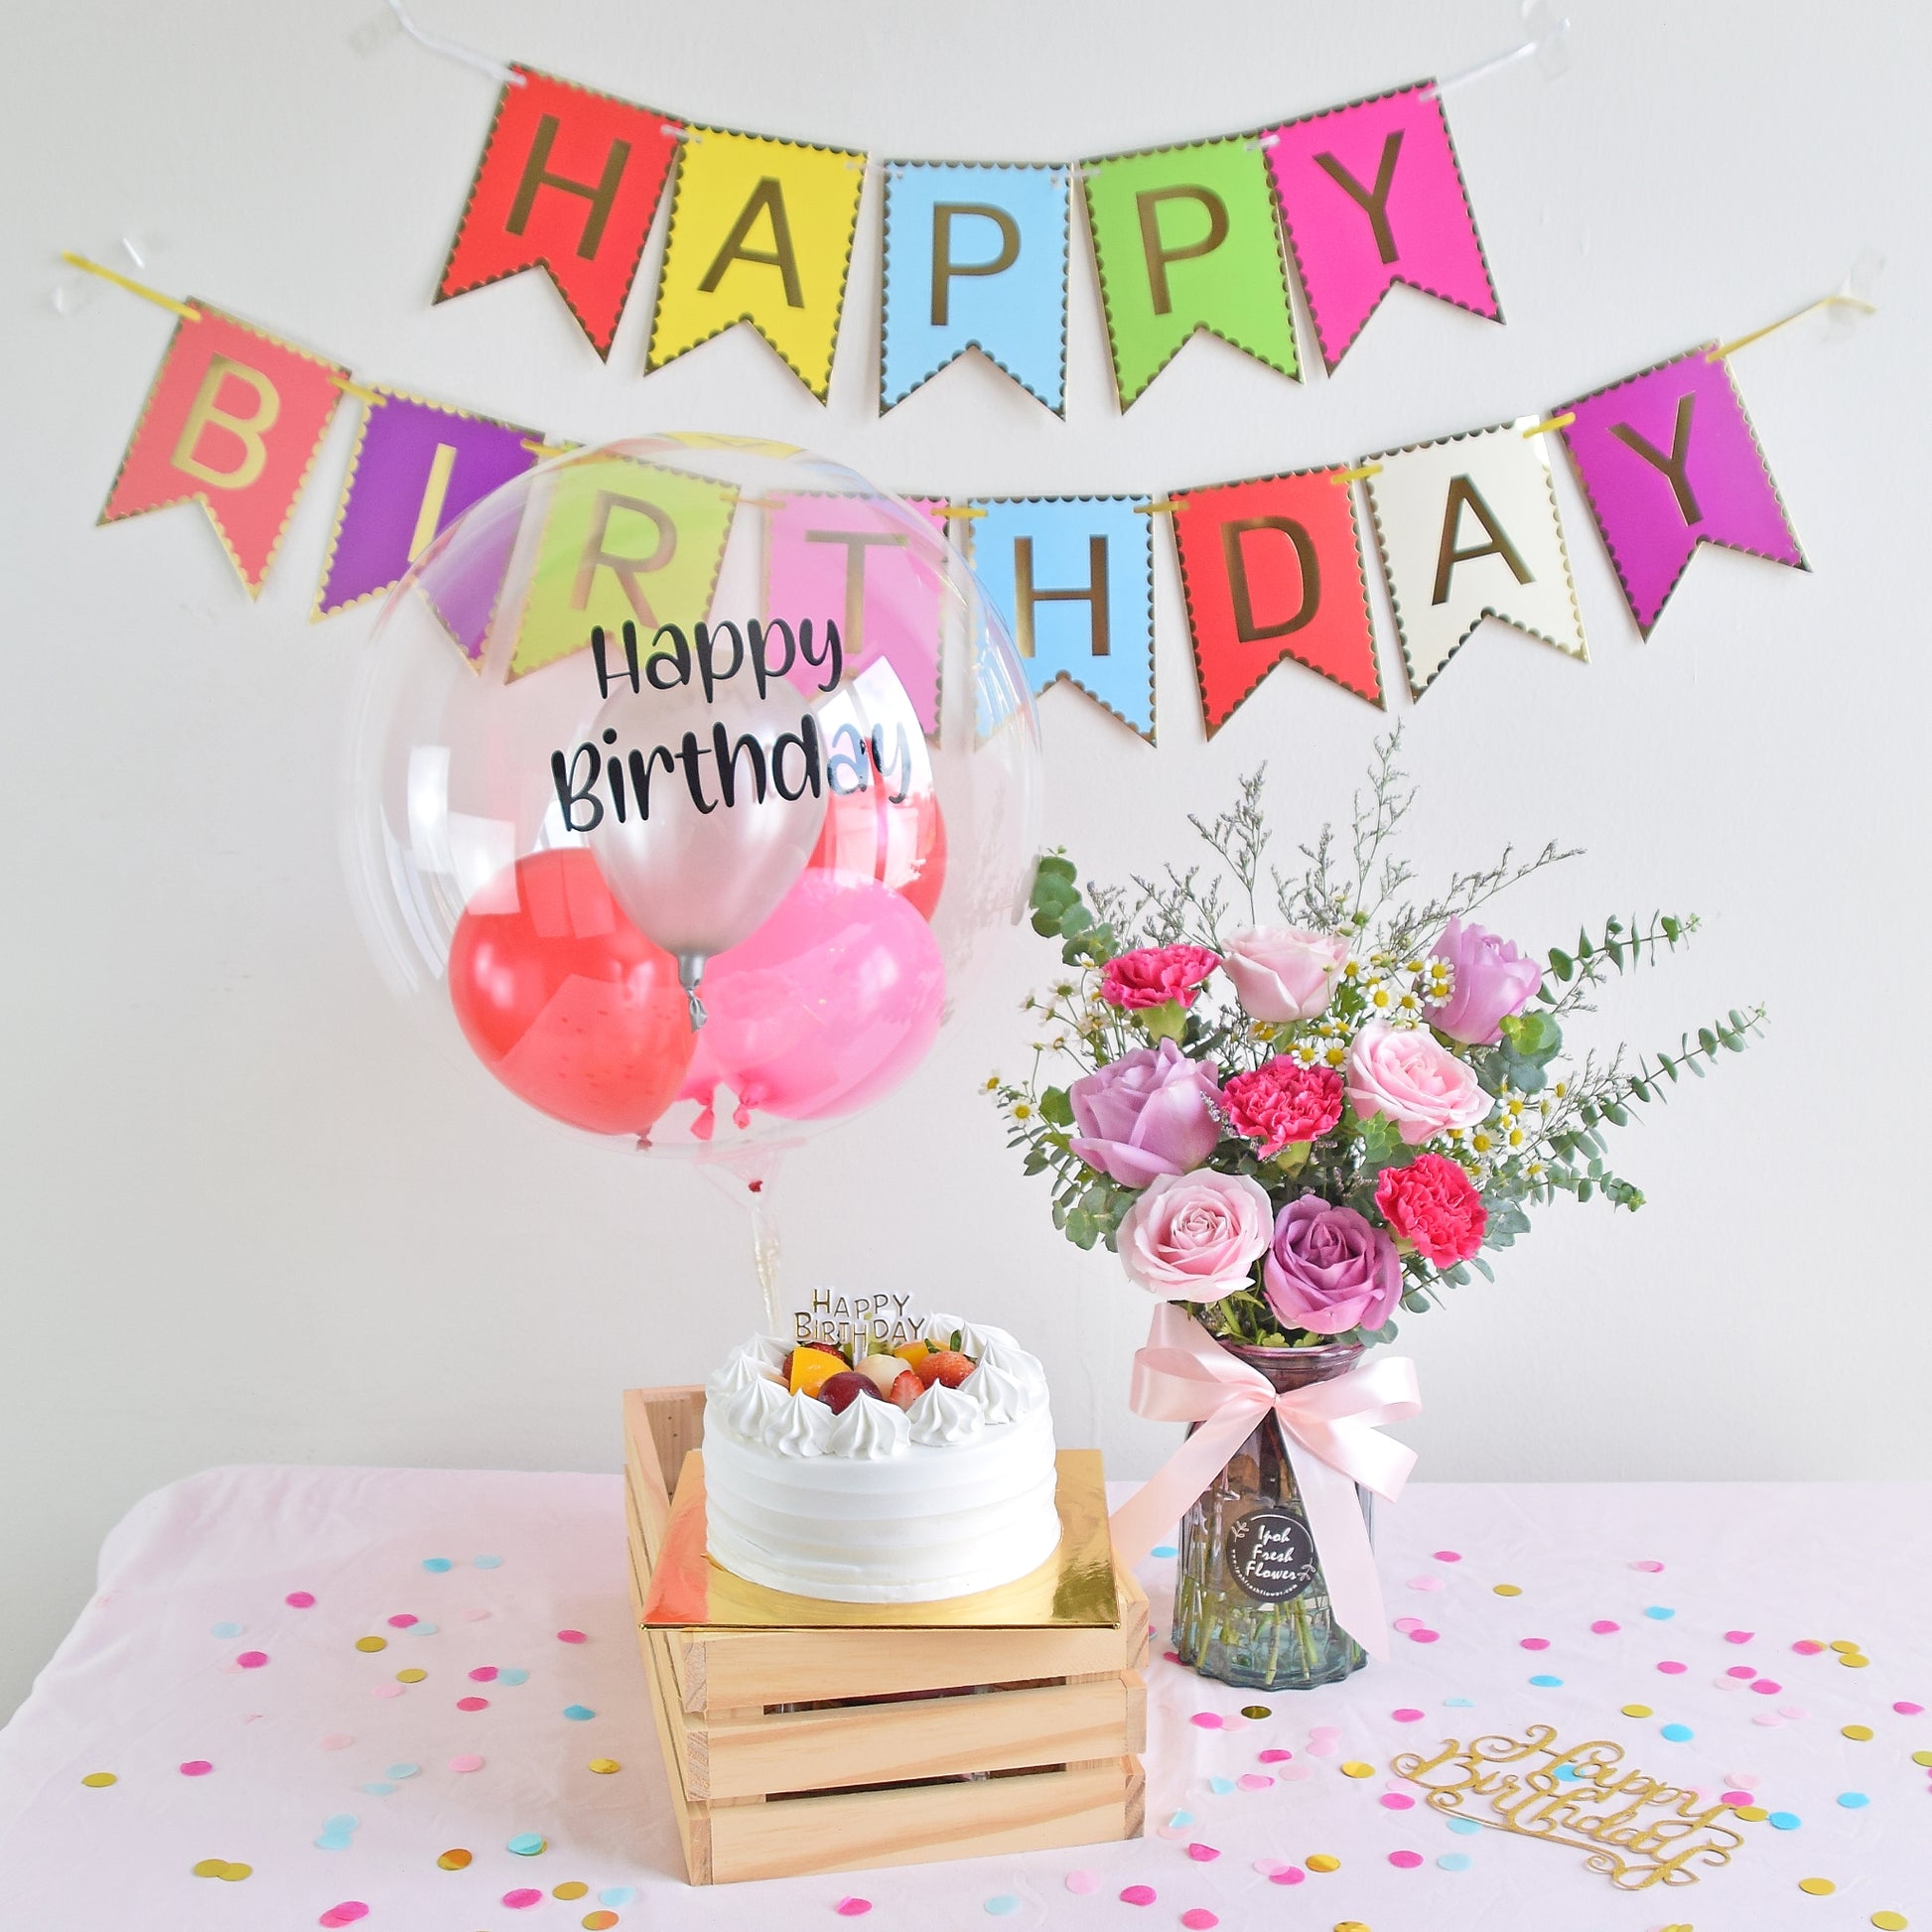 Lovely Day Birthday Bundle| Flowers, Balloons & Cake| Same Day Delivery